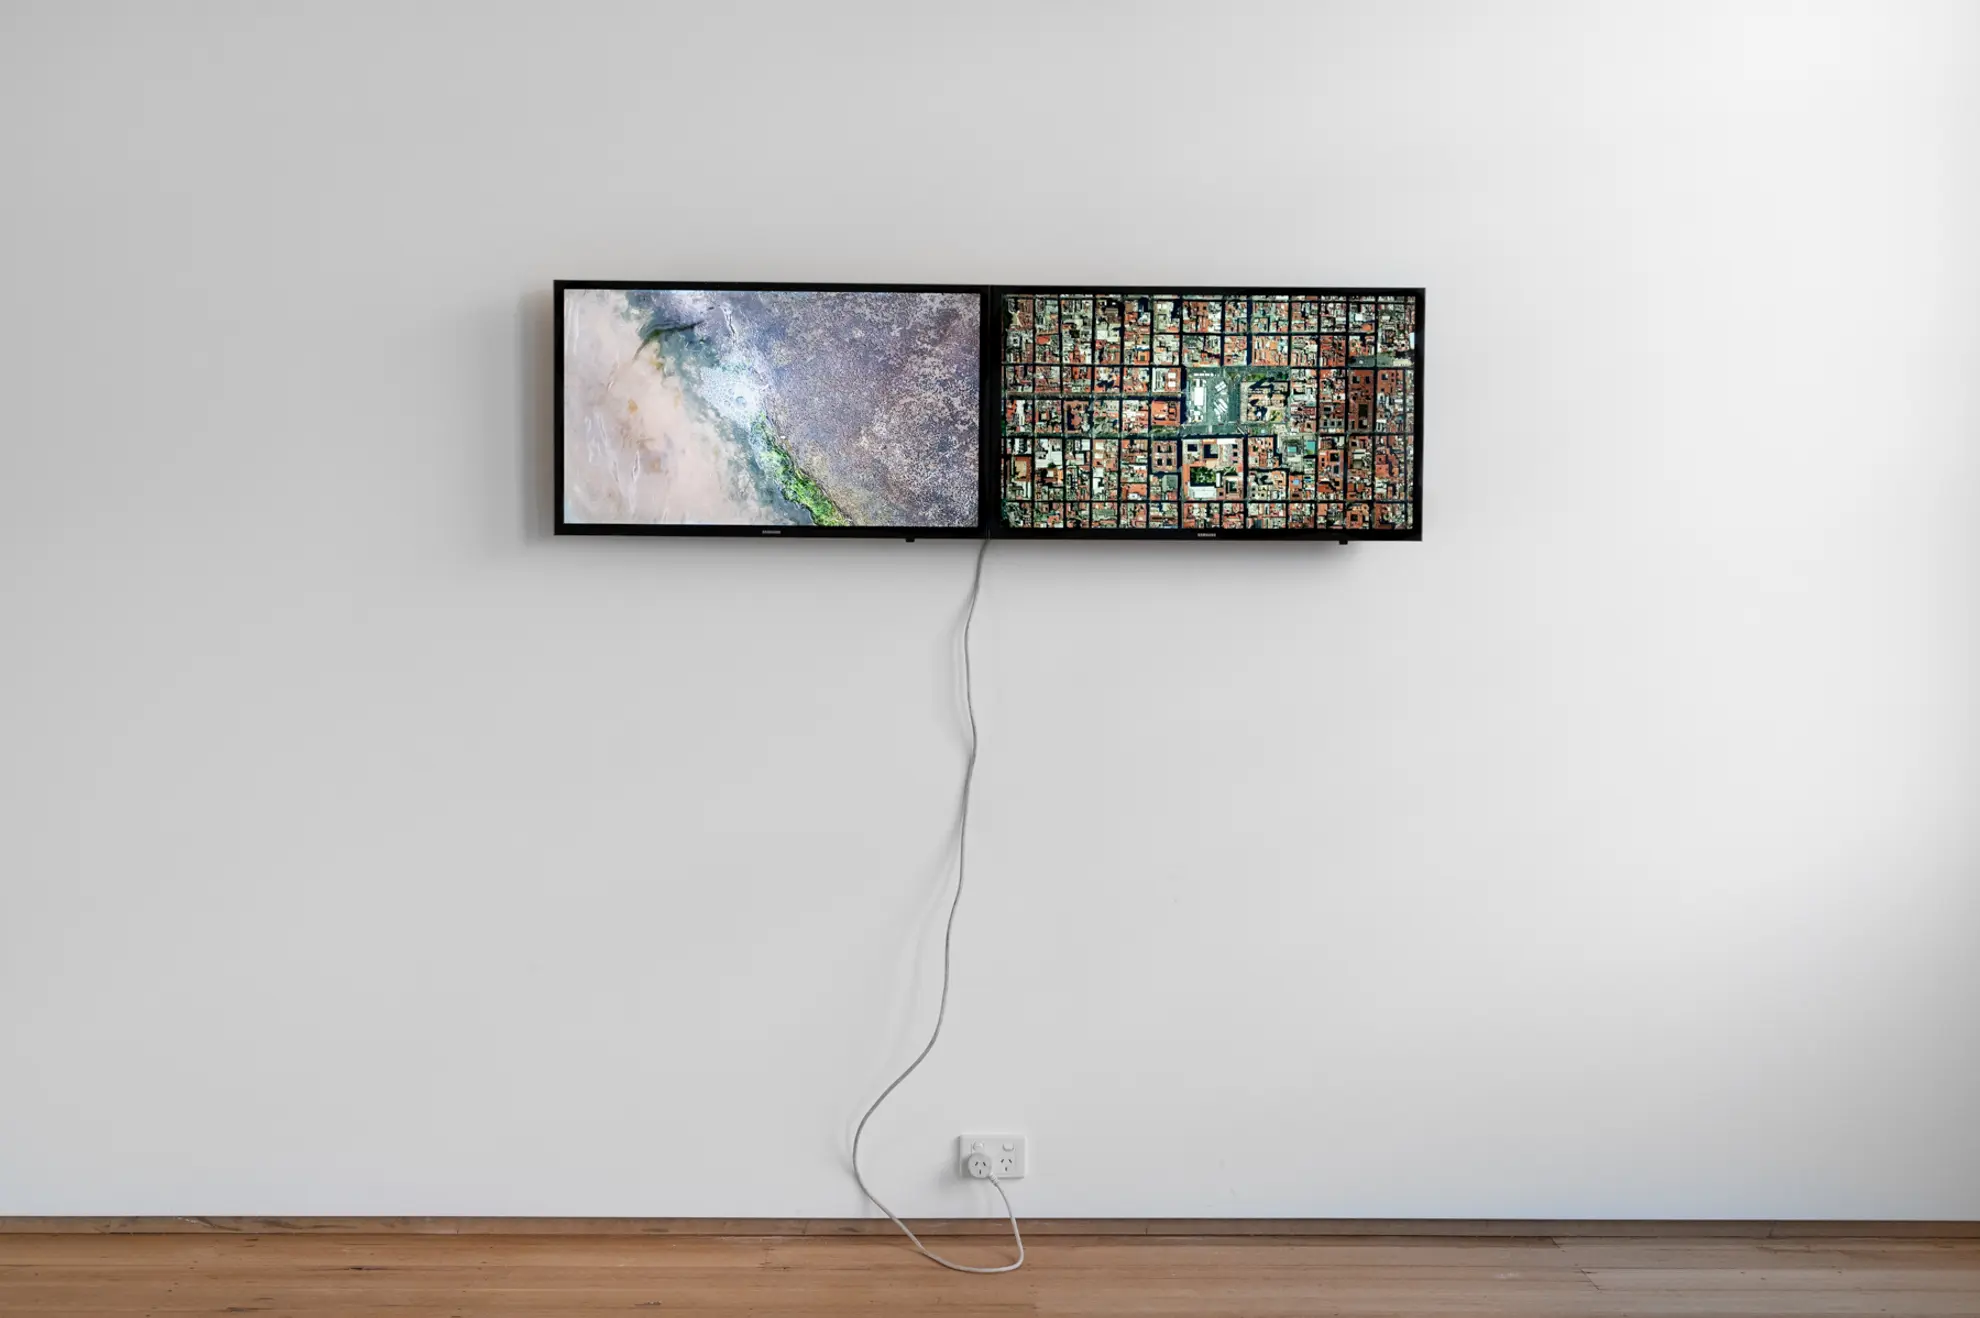 Front on installation view of two screens fixed at eye level on a white wall. The right screen depicts a top down view of many city blocks with red and green roofing. The left screen displays a satellite image of a dry landscape.